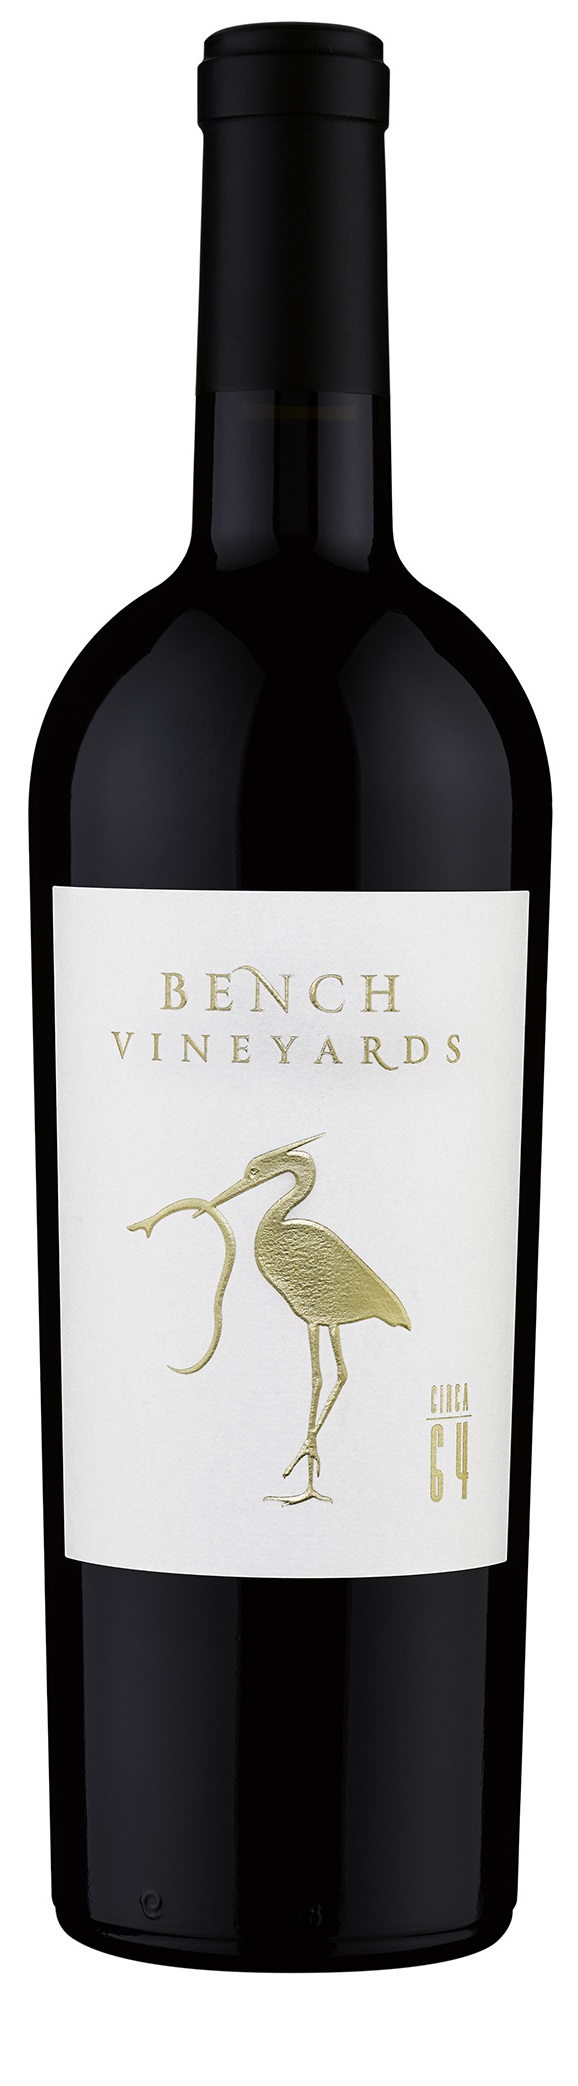 Product Image for 2014 Bench Vineyards "Circa 64" Red Wine, SLD